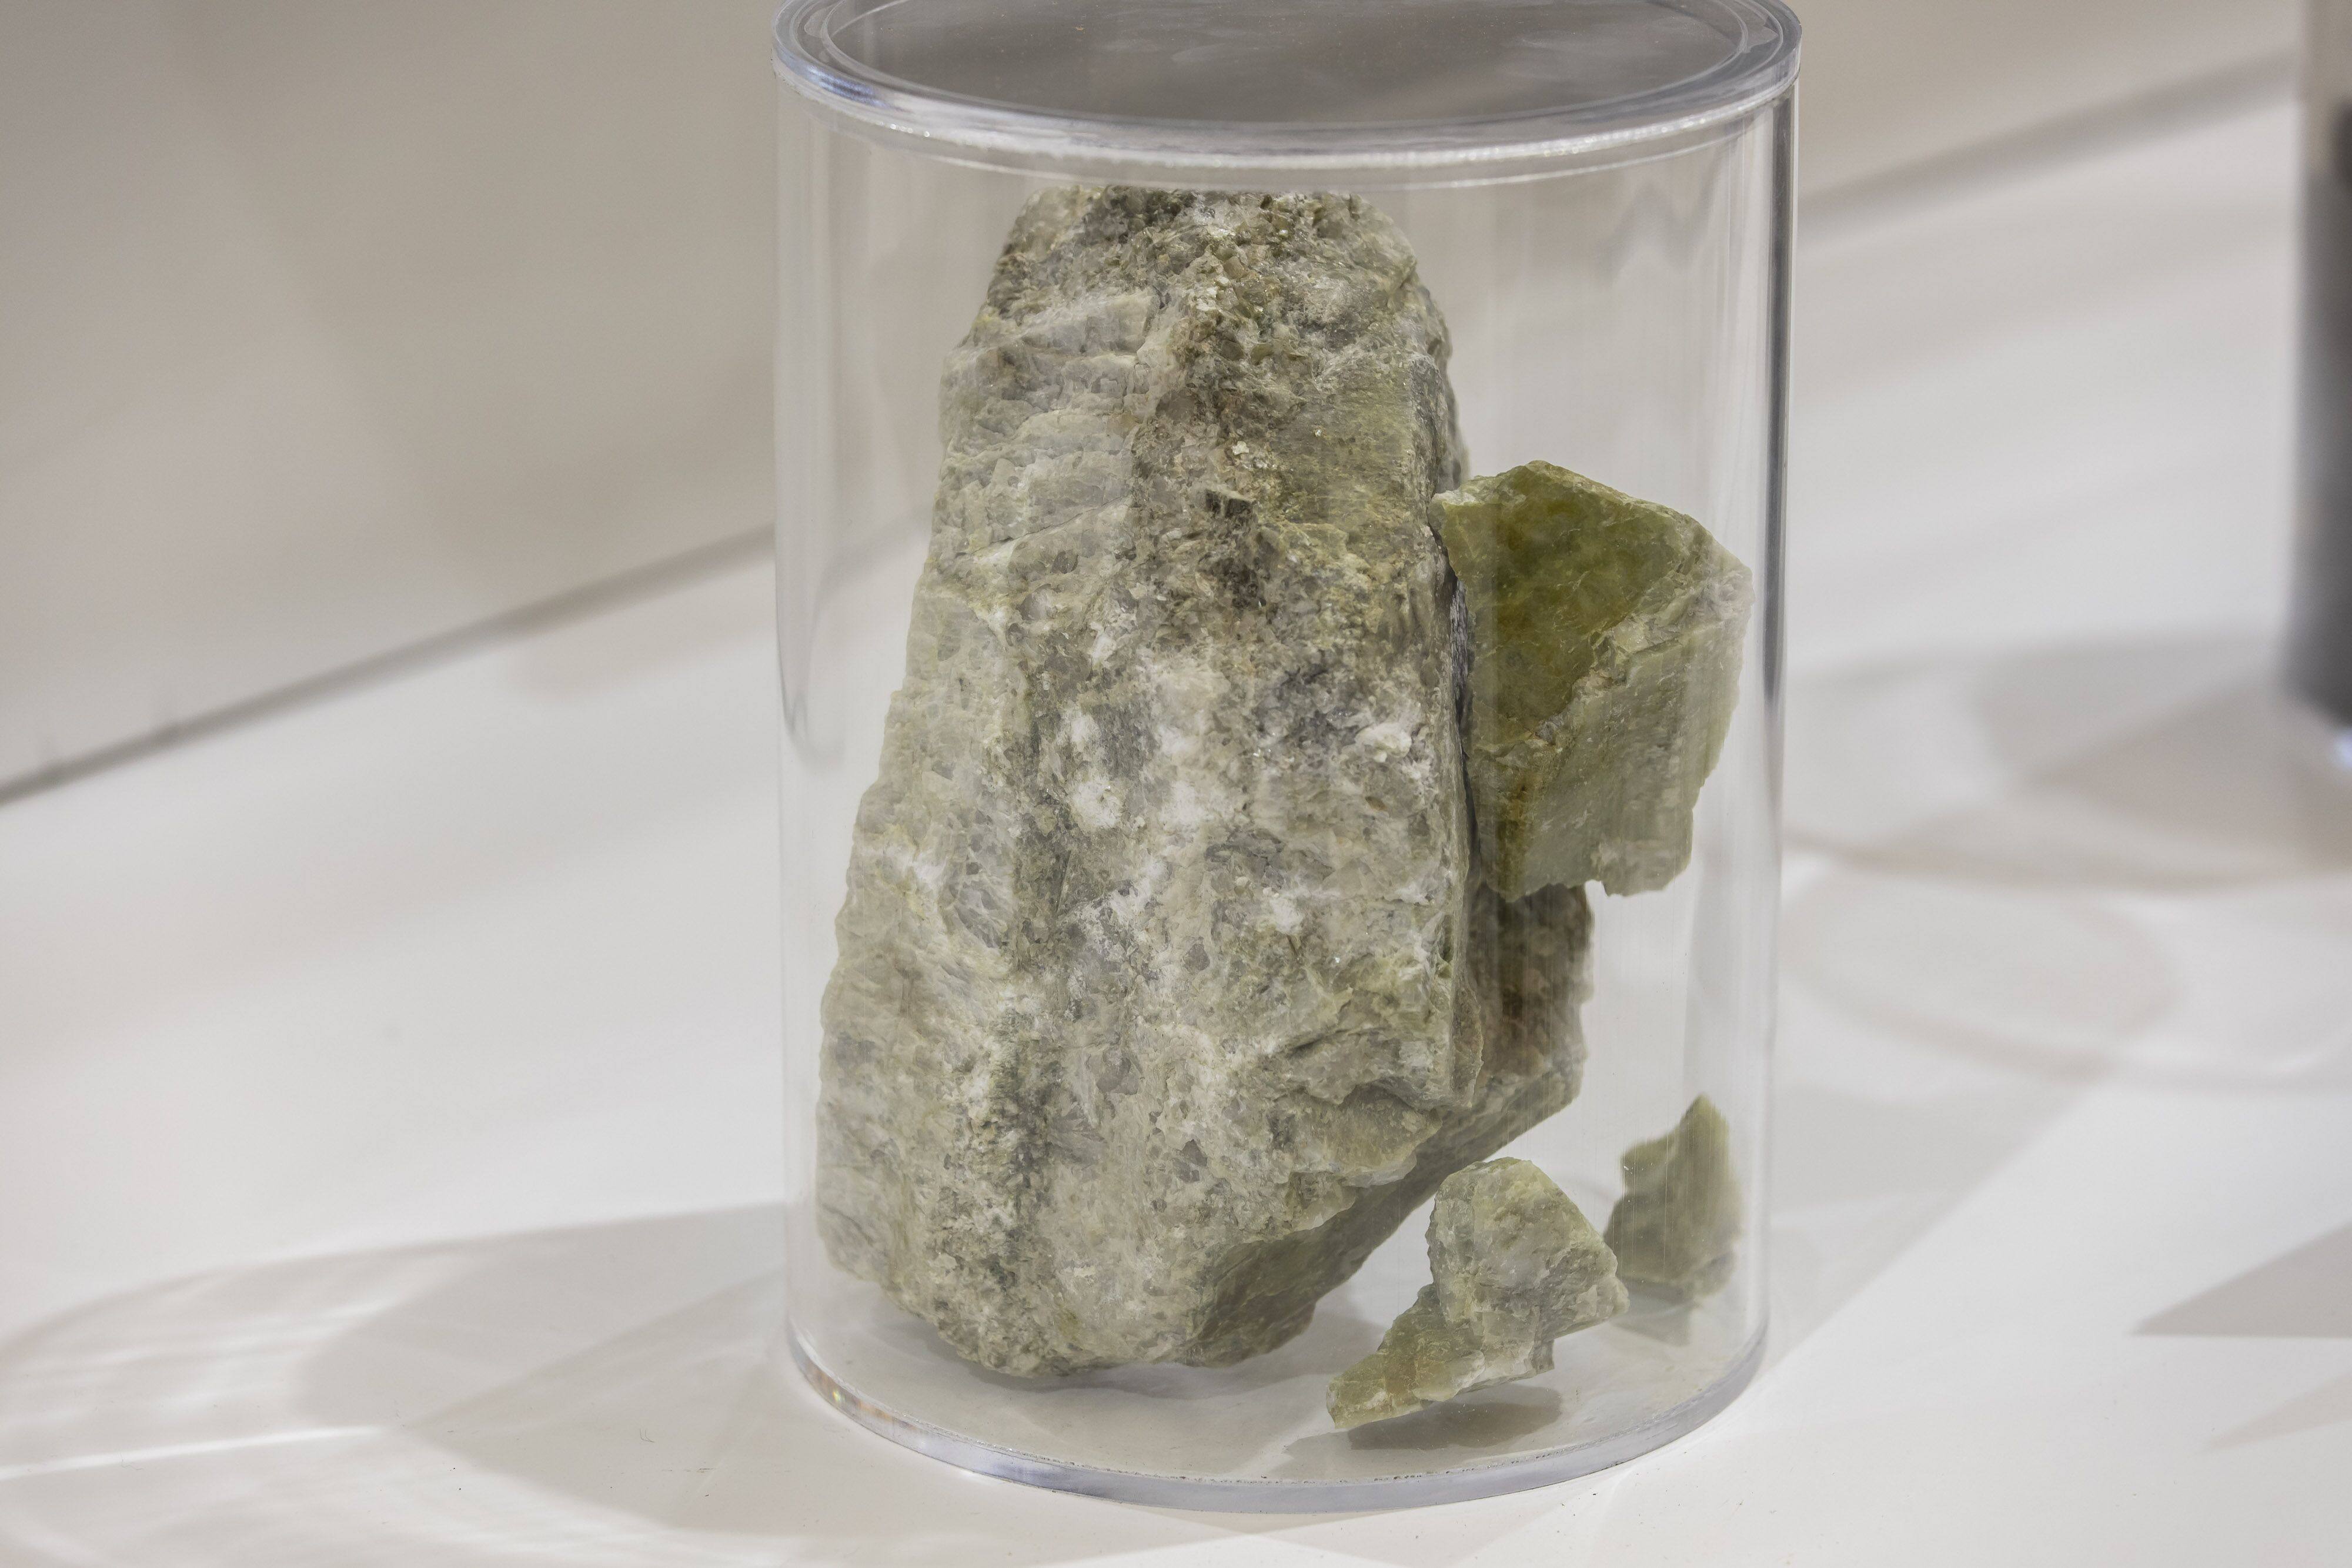 A sample of lithium ore on display at the International Energy Storage Technology, Equipment, and Application Conference in Shanghai on November 1, 2023. Photo: Bloomberg